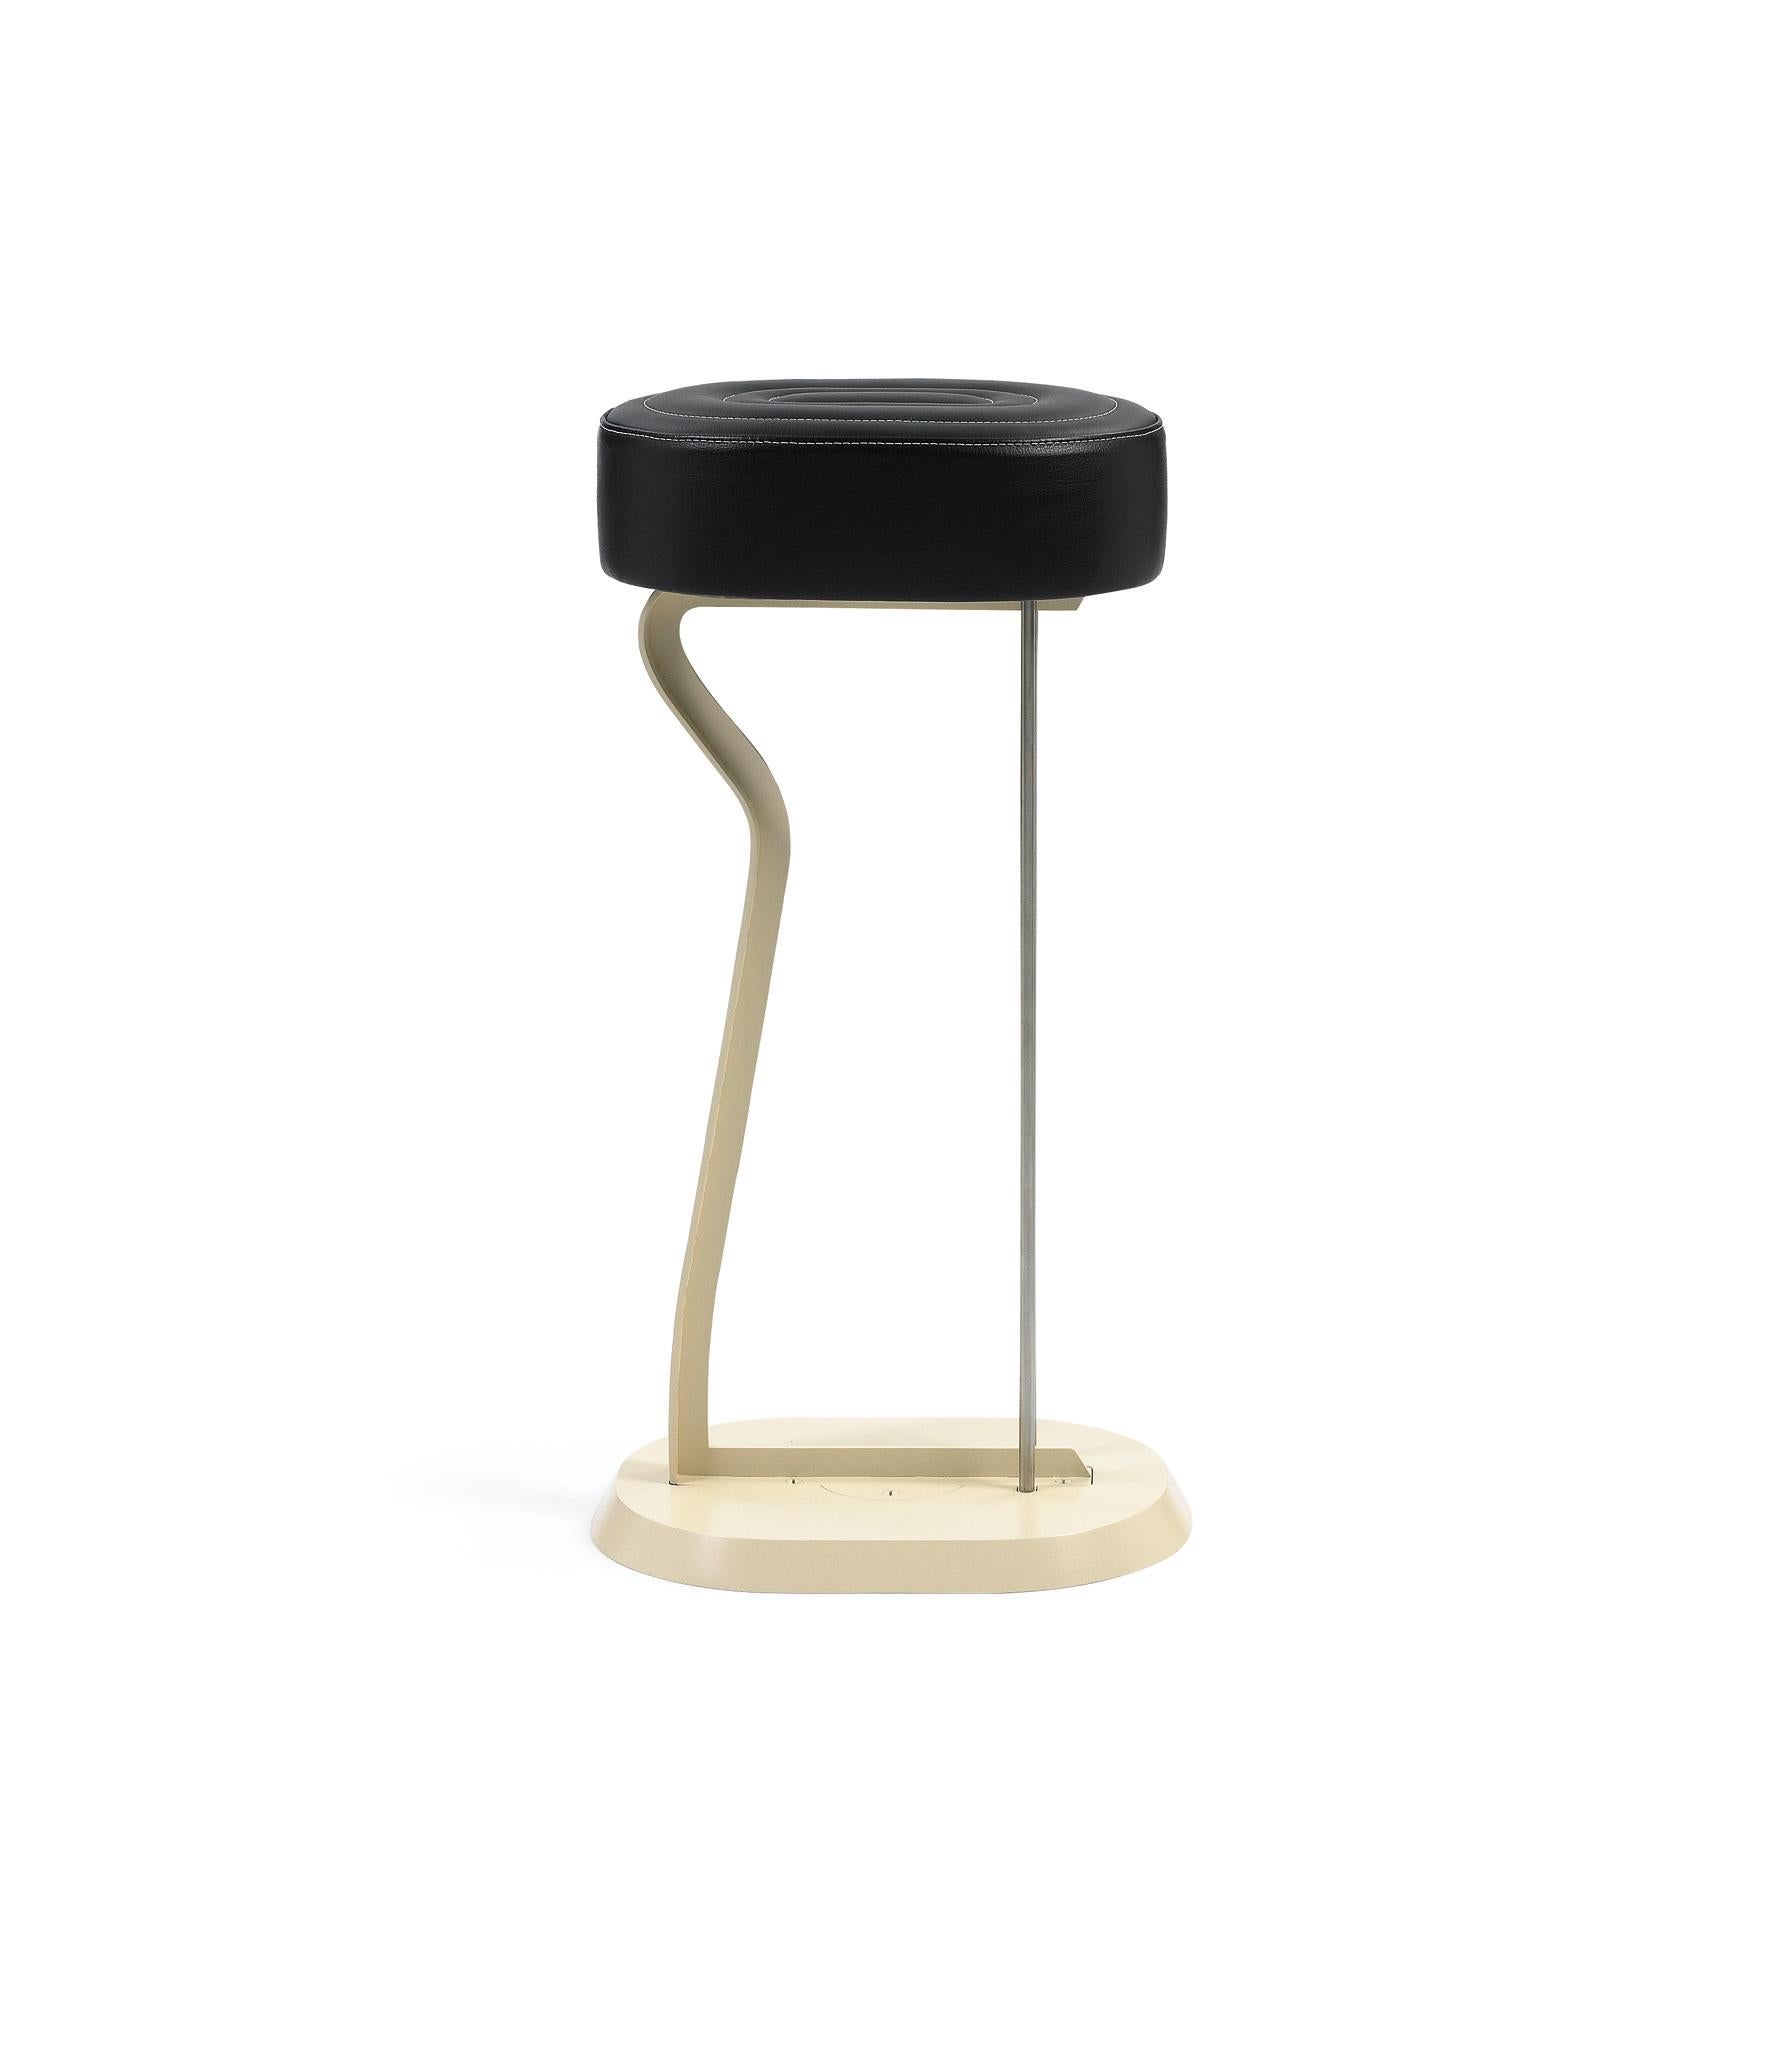 Eileen gray created not only classical seats such as sofas or chairs, but also a series of unconventional bar stools. Version no. 2, originally designed for the house E 1027, also featured in her Paris apartment in Rue Bonaparte. In her Provençal